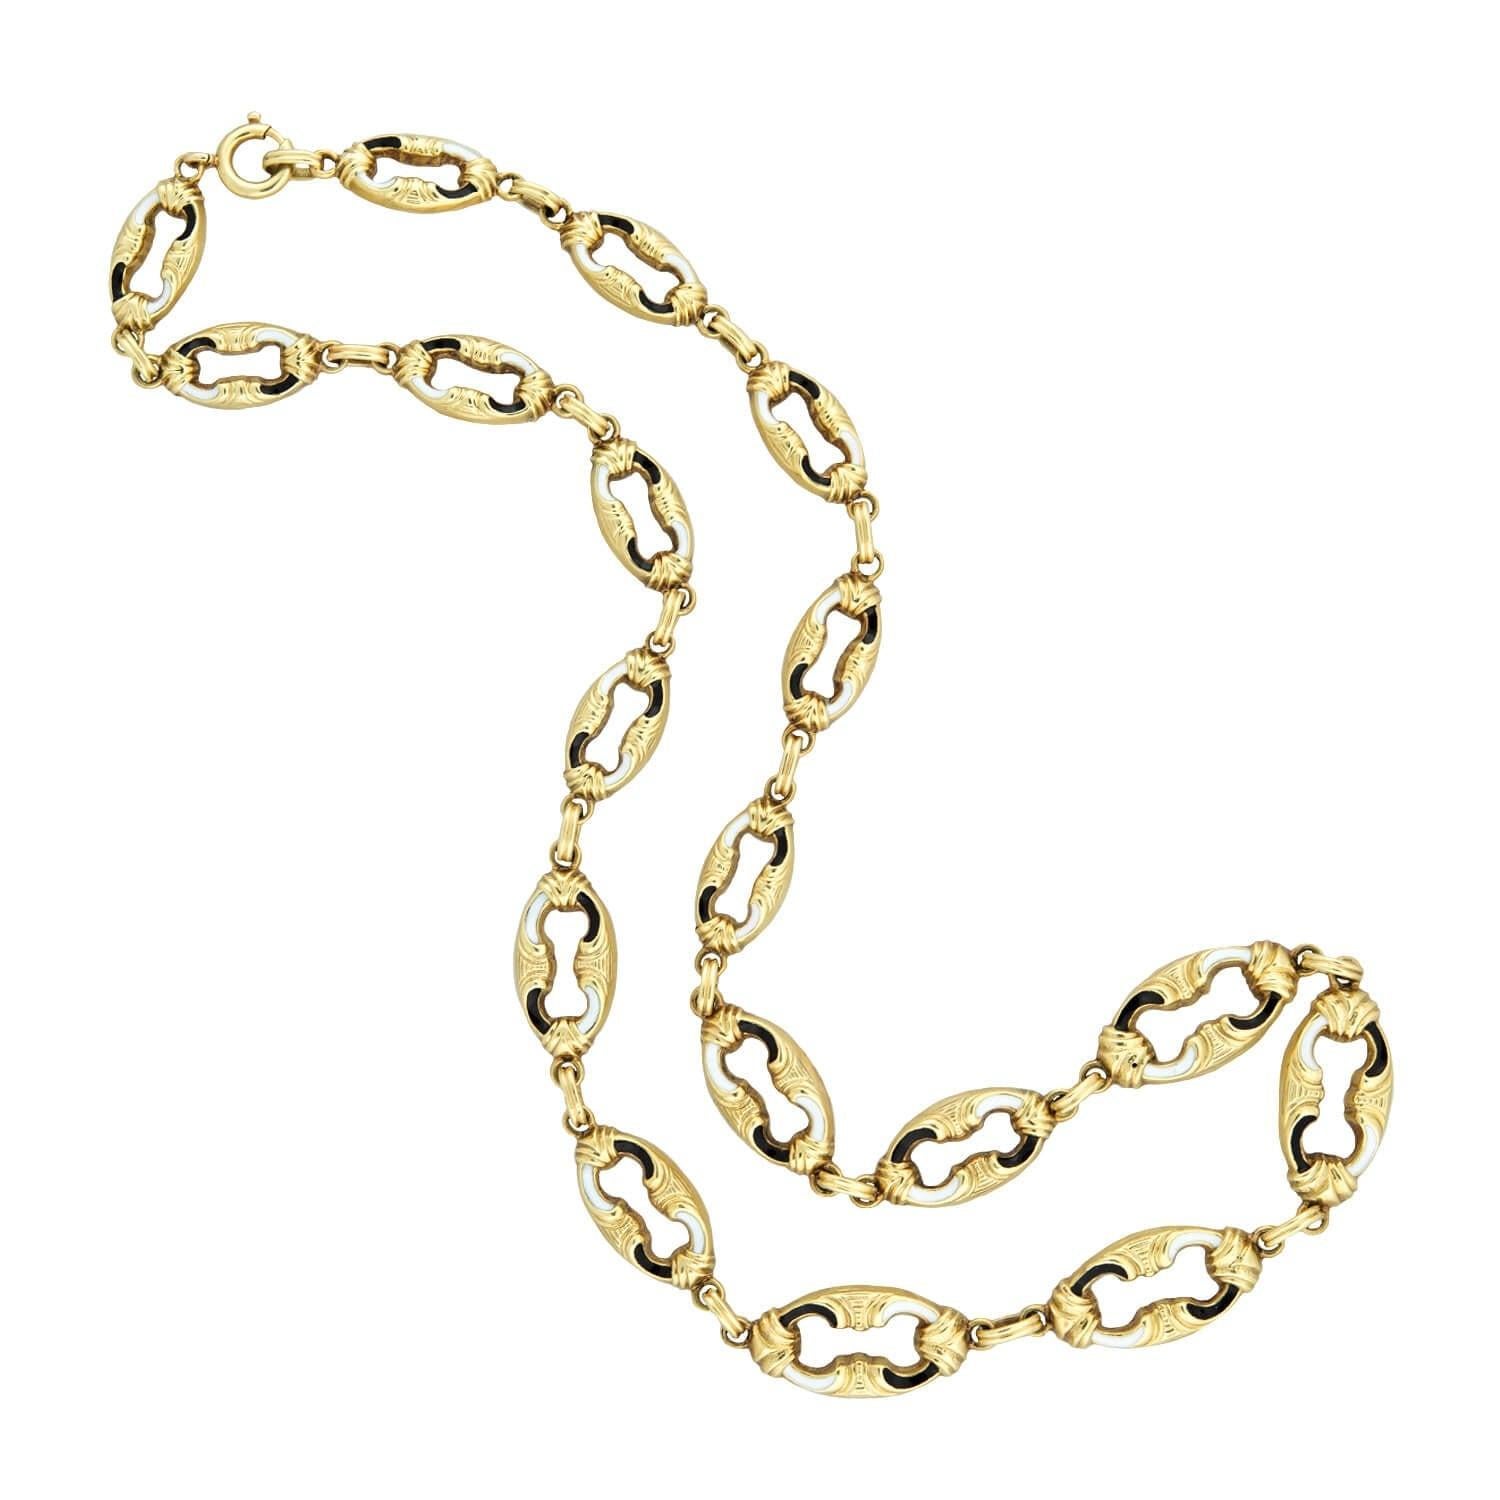 A wonderful Swiss enamel chain from the Edwardian (ca 1900s)era! Crafted in bright 14kt yellow gold, the piece is comprised of open oval links that graduate in size and connect to form a gorgeous flexible chain. An incredible black and white Swiss